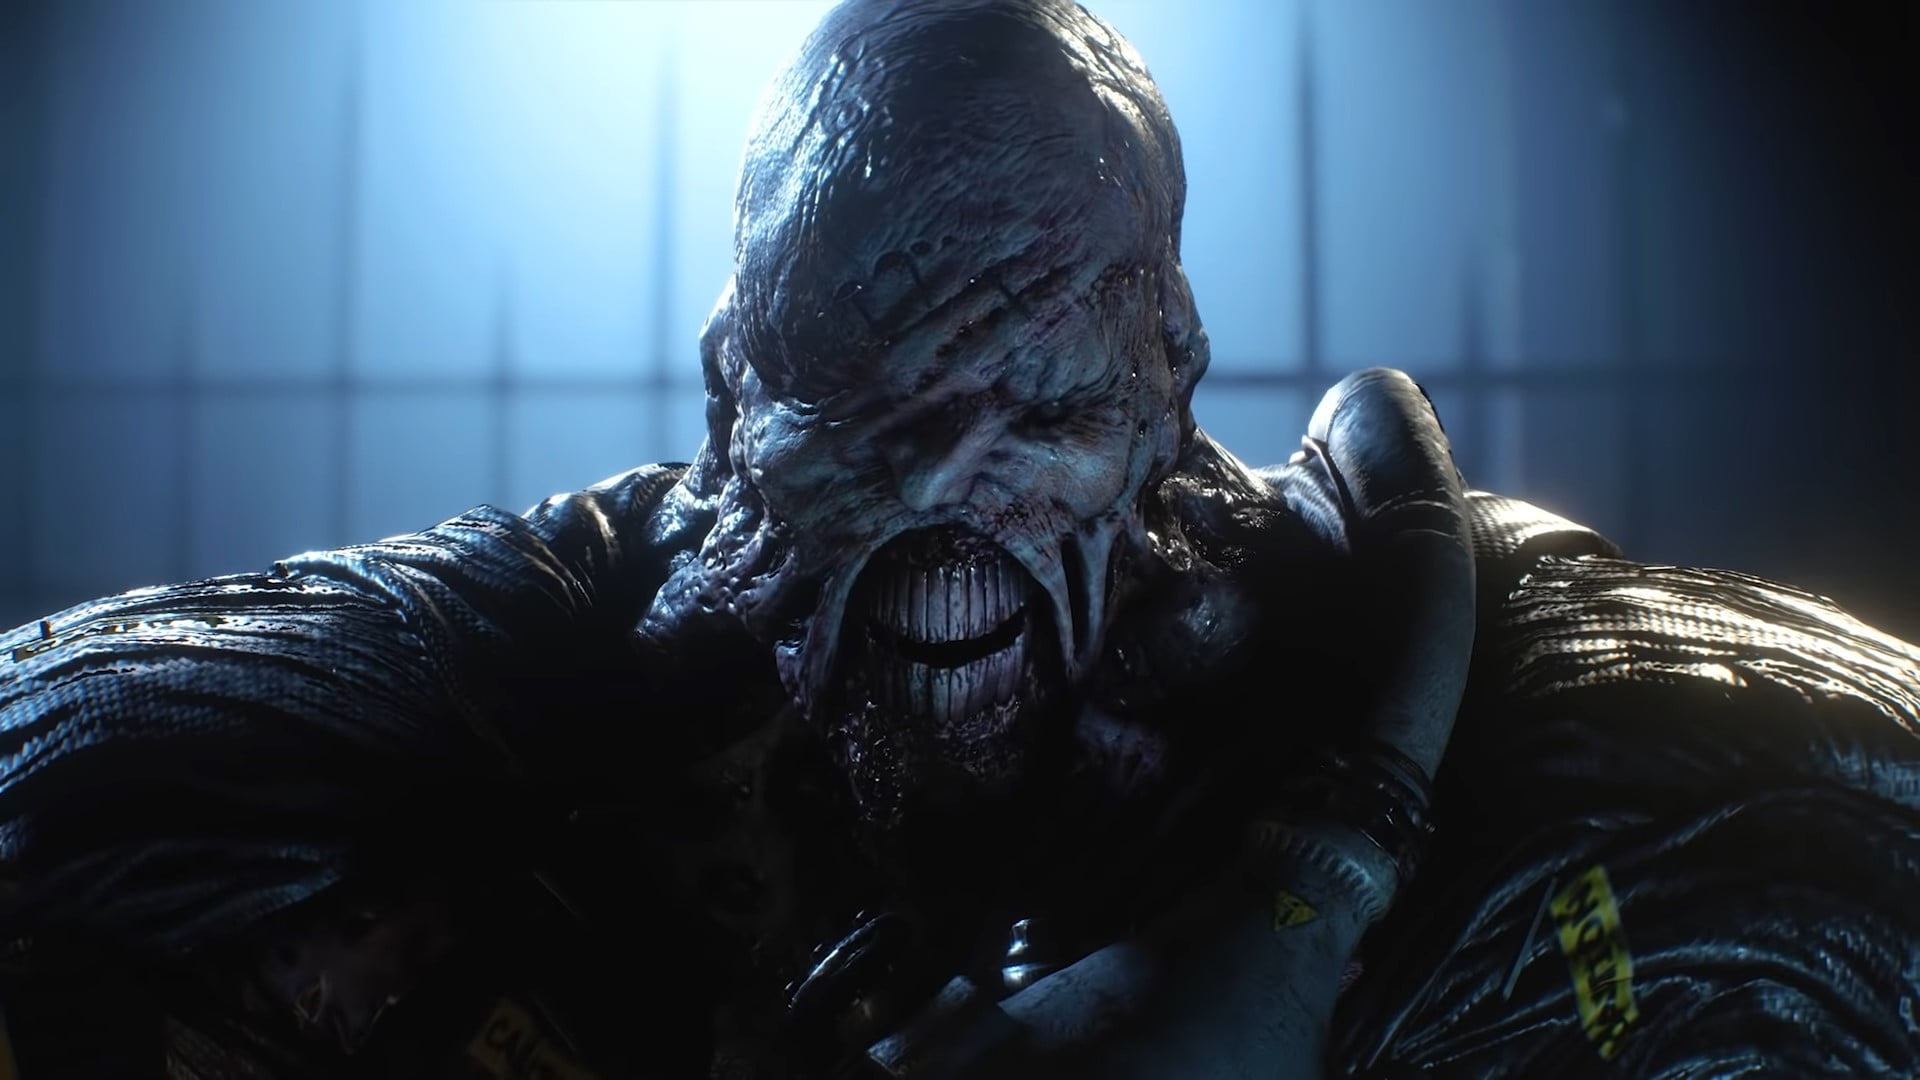 Big in 2020: Resident Evil 3 Remake is another chance at life for